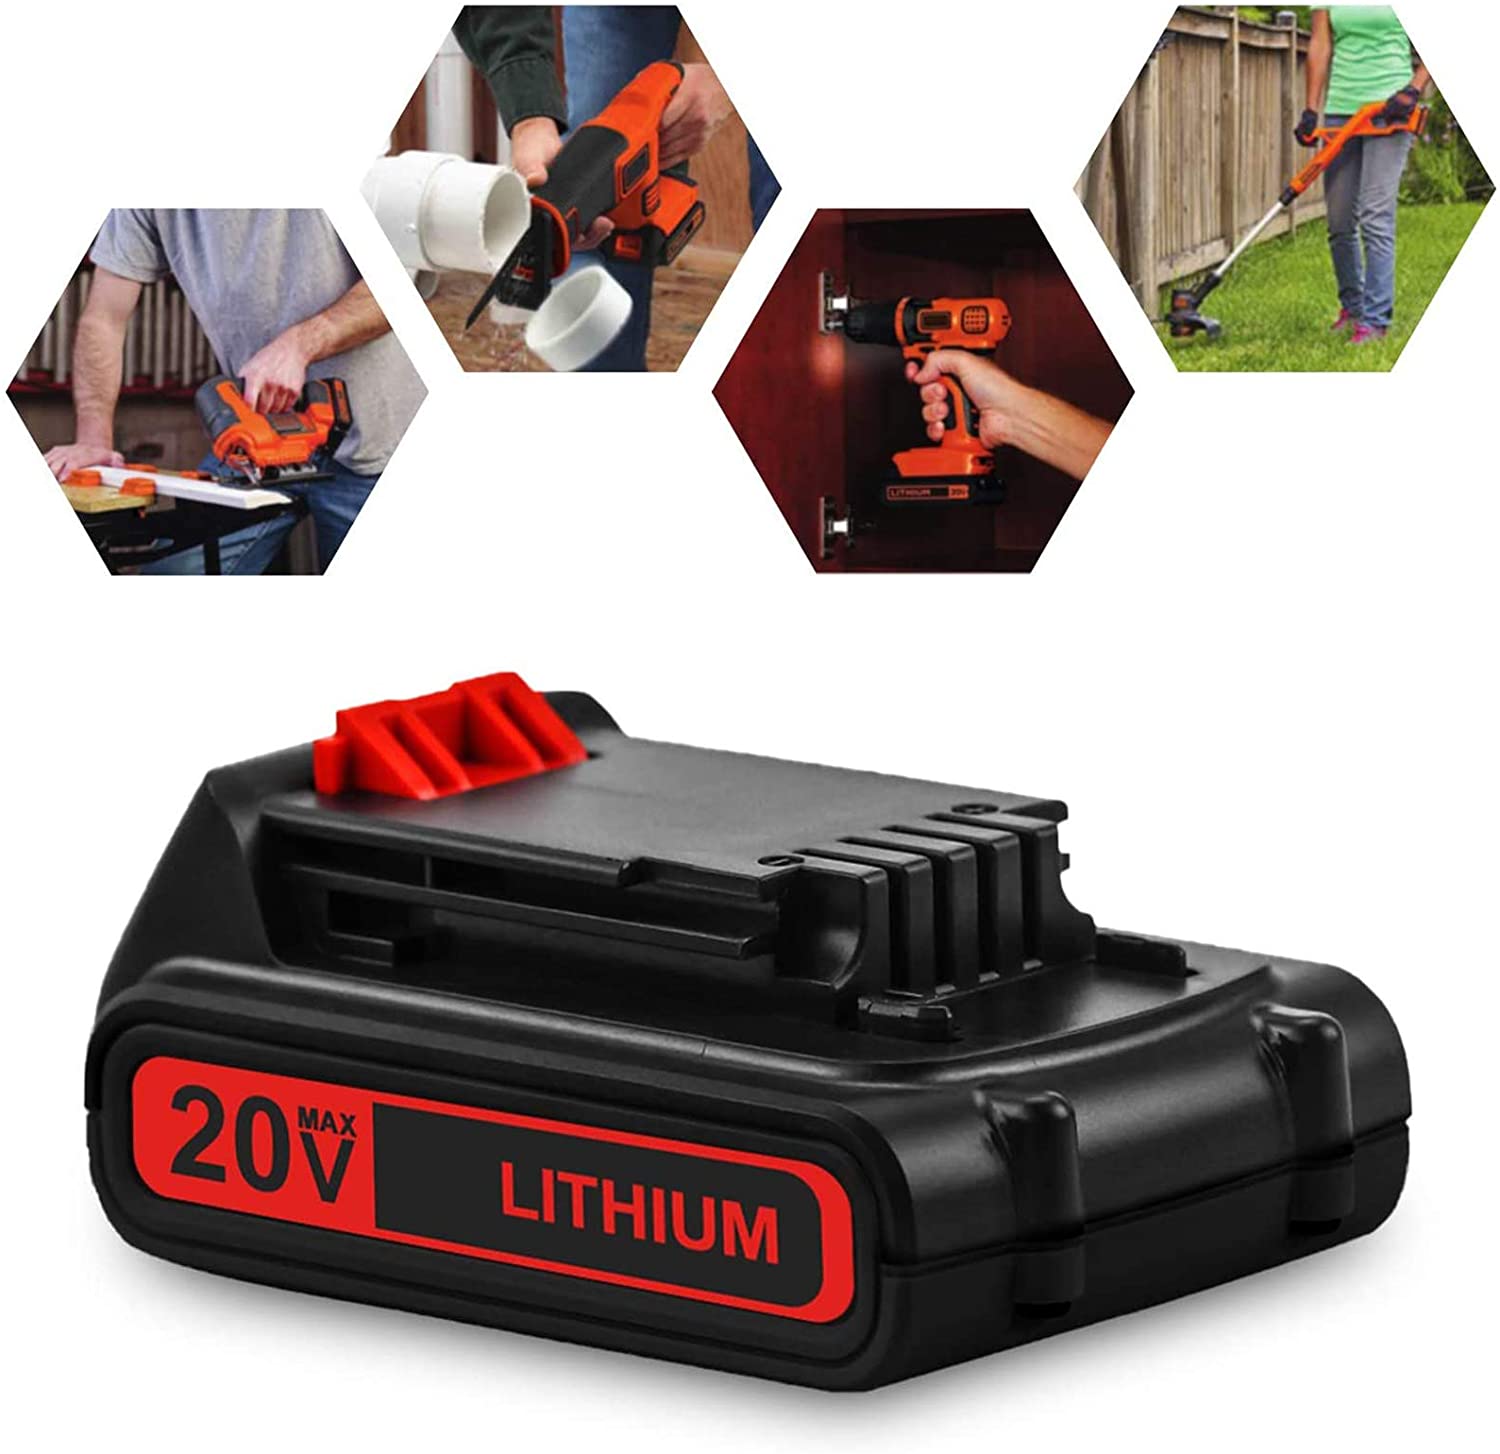 LBXR20 20 Volt 3000mAh Replacement Battery Compatible with Black and Decker 20V Lithium Battery Max LB20 LBX20 LST220 LBXR2020-OPE LBXR20B-2 LB2X4020 Cordless Tool Batteries - image 5 of 7